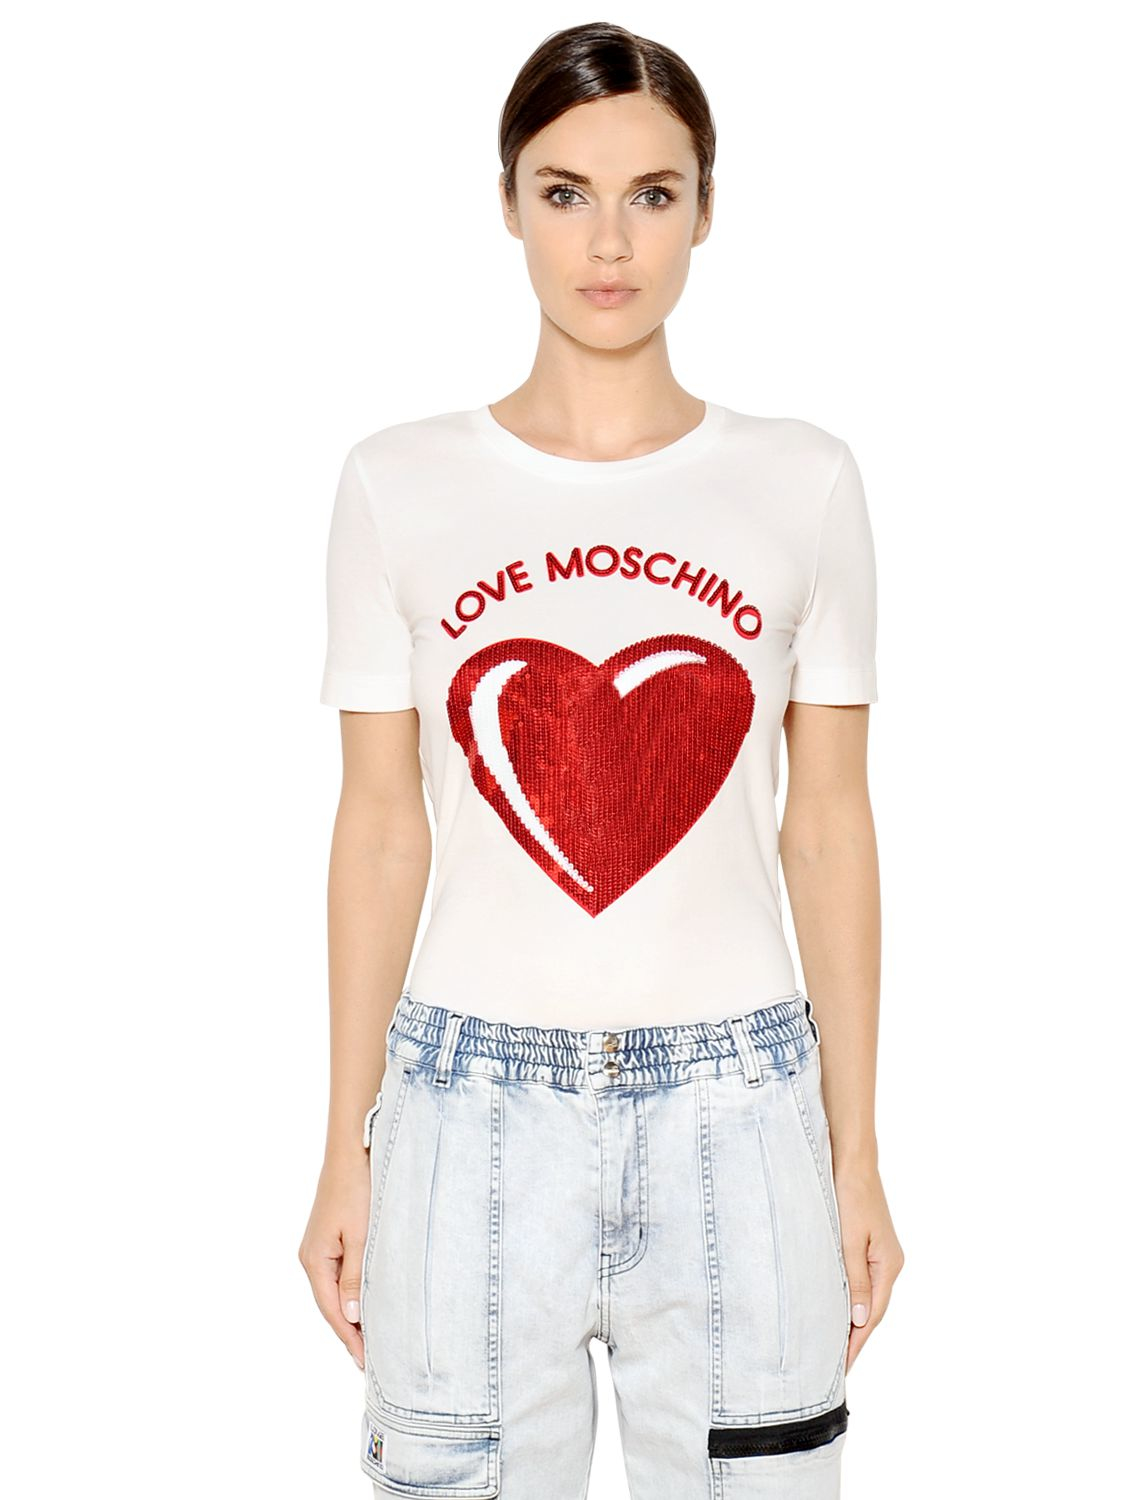 Lyst - Love Moschino Heart Sequined Cotton Jersey T-shirt in White